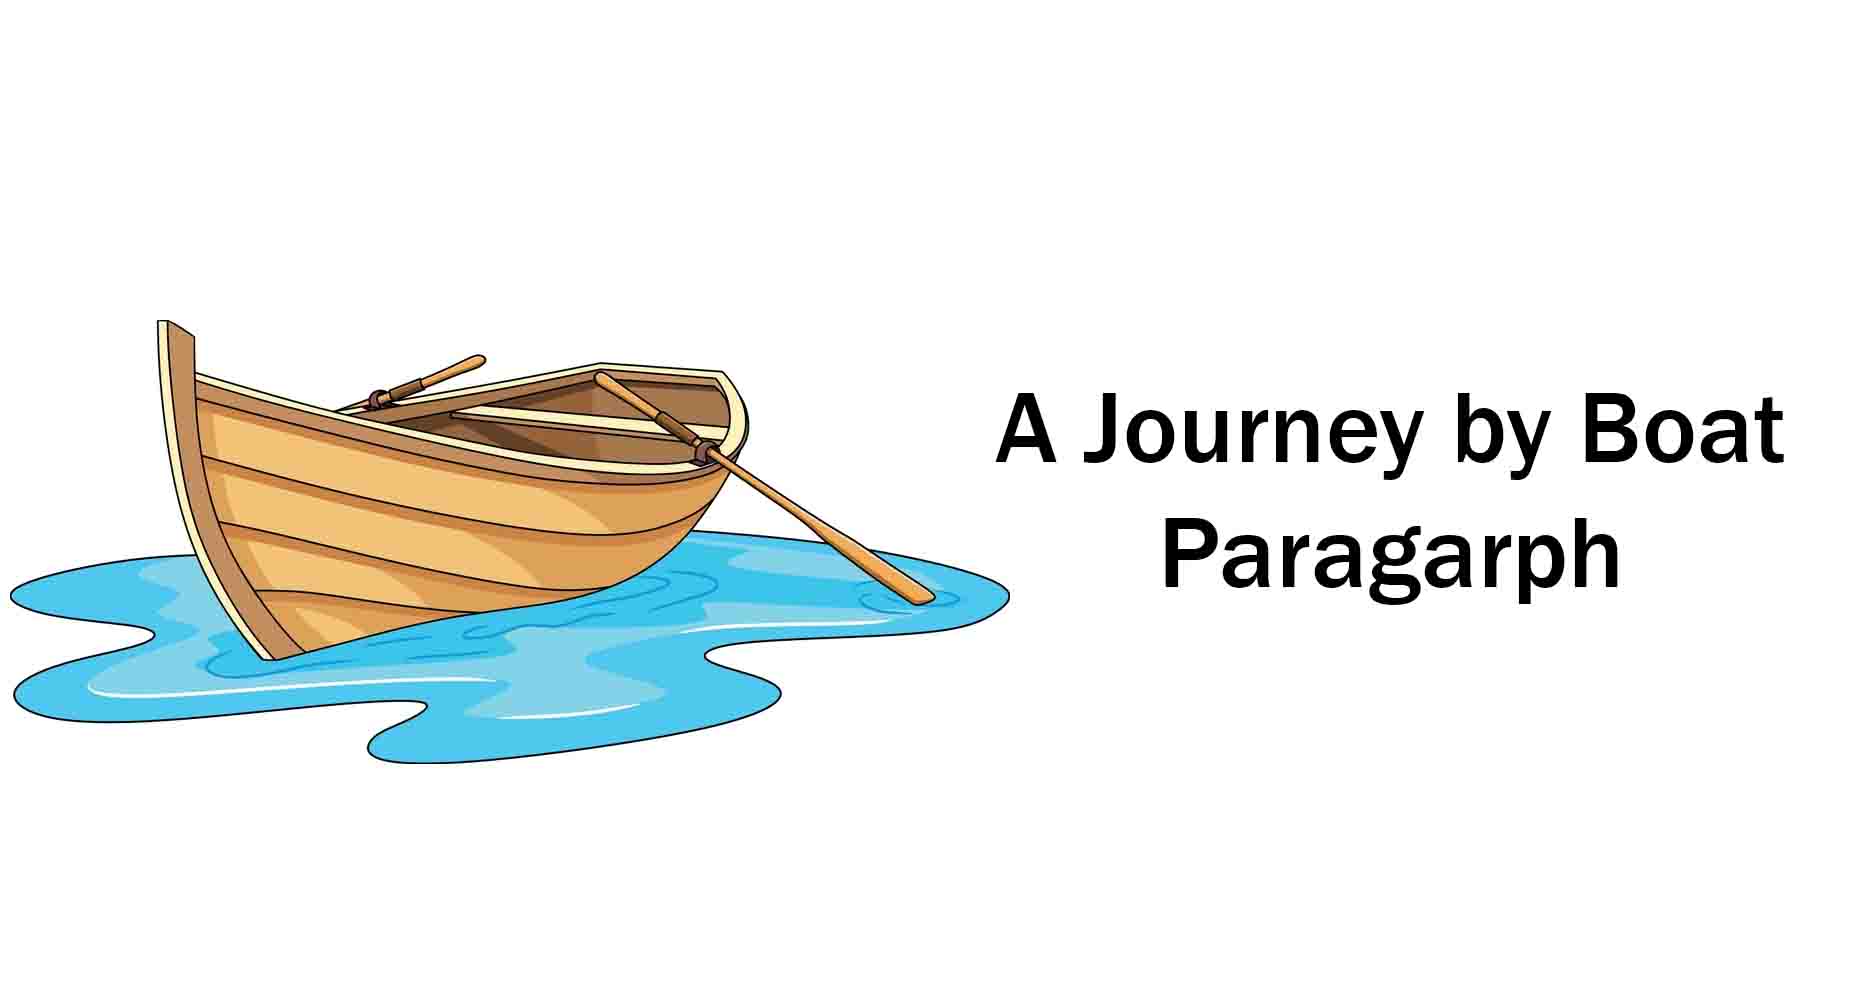 A Journey by Boat paragraph